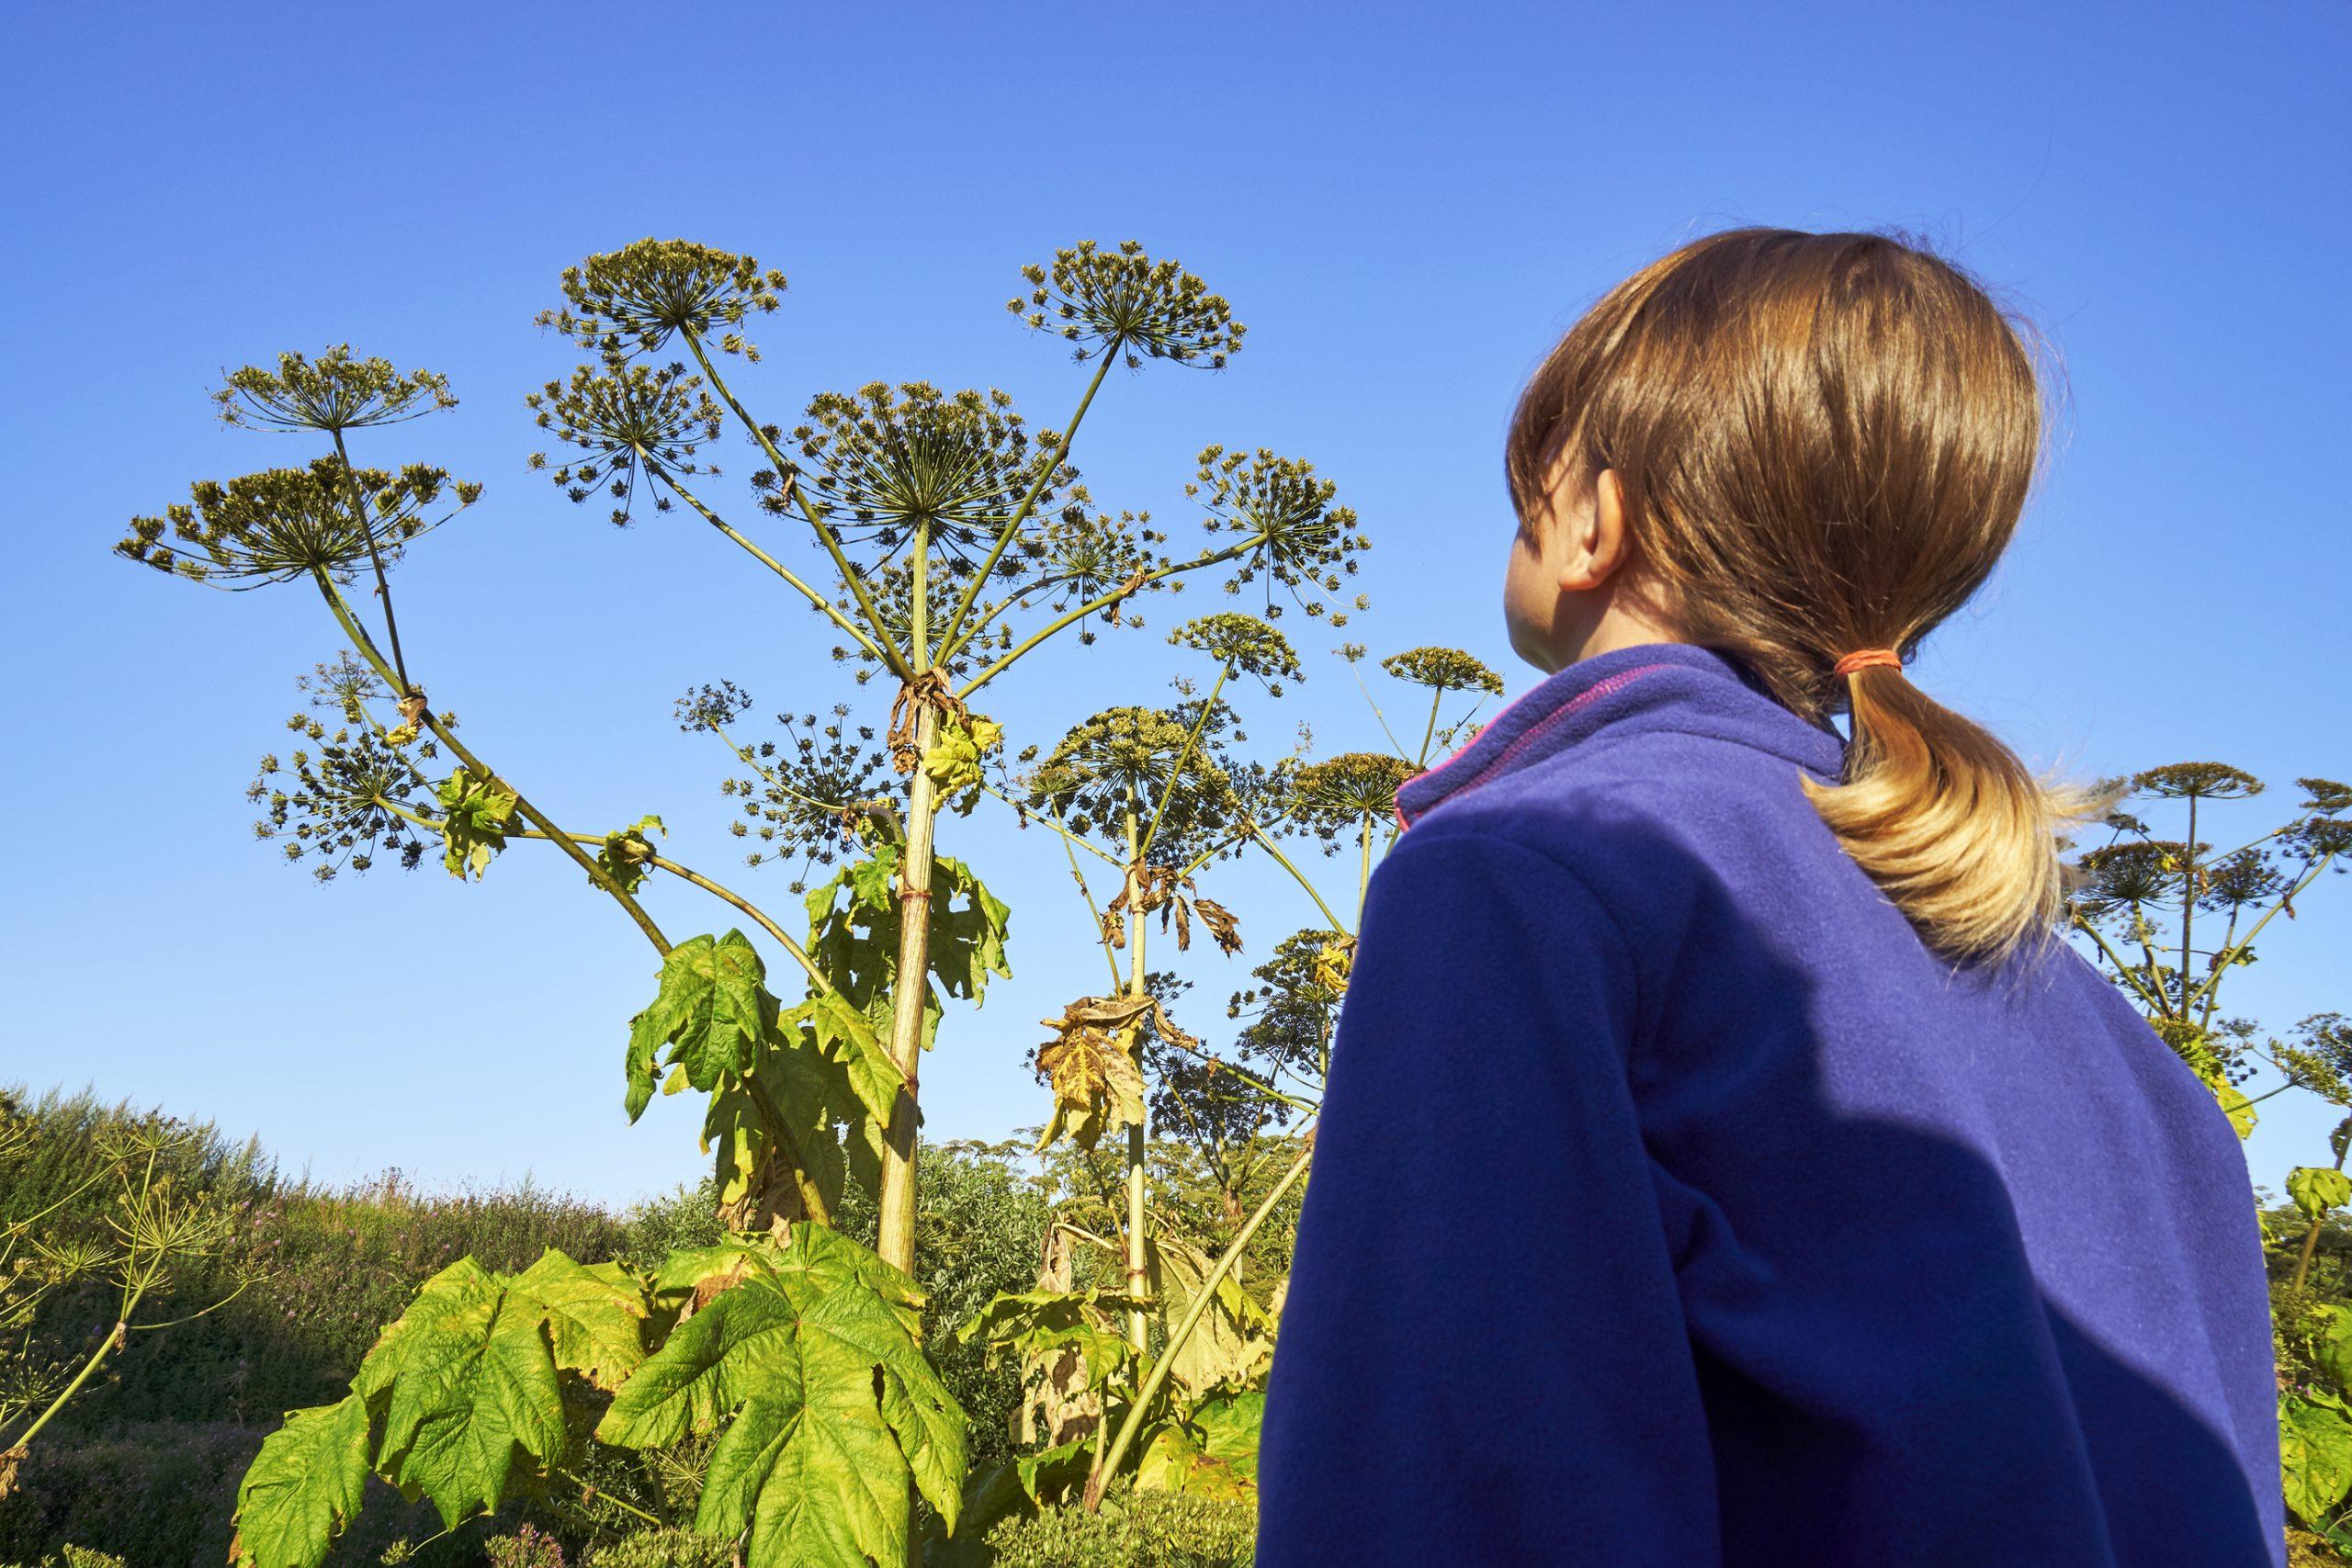 Identifying Giant Hogweed from its umbrella like flowers which tower above you and up to 20 feet